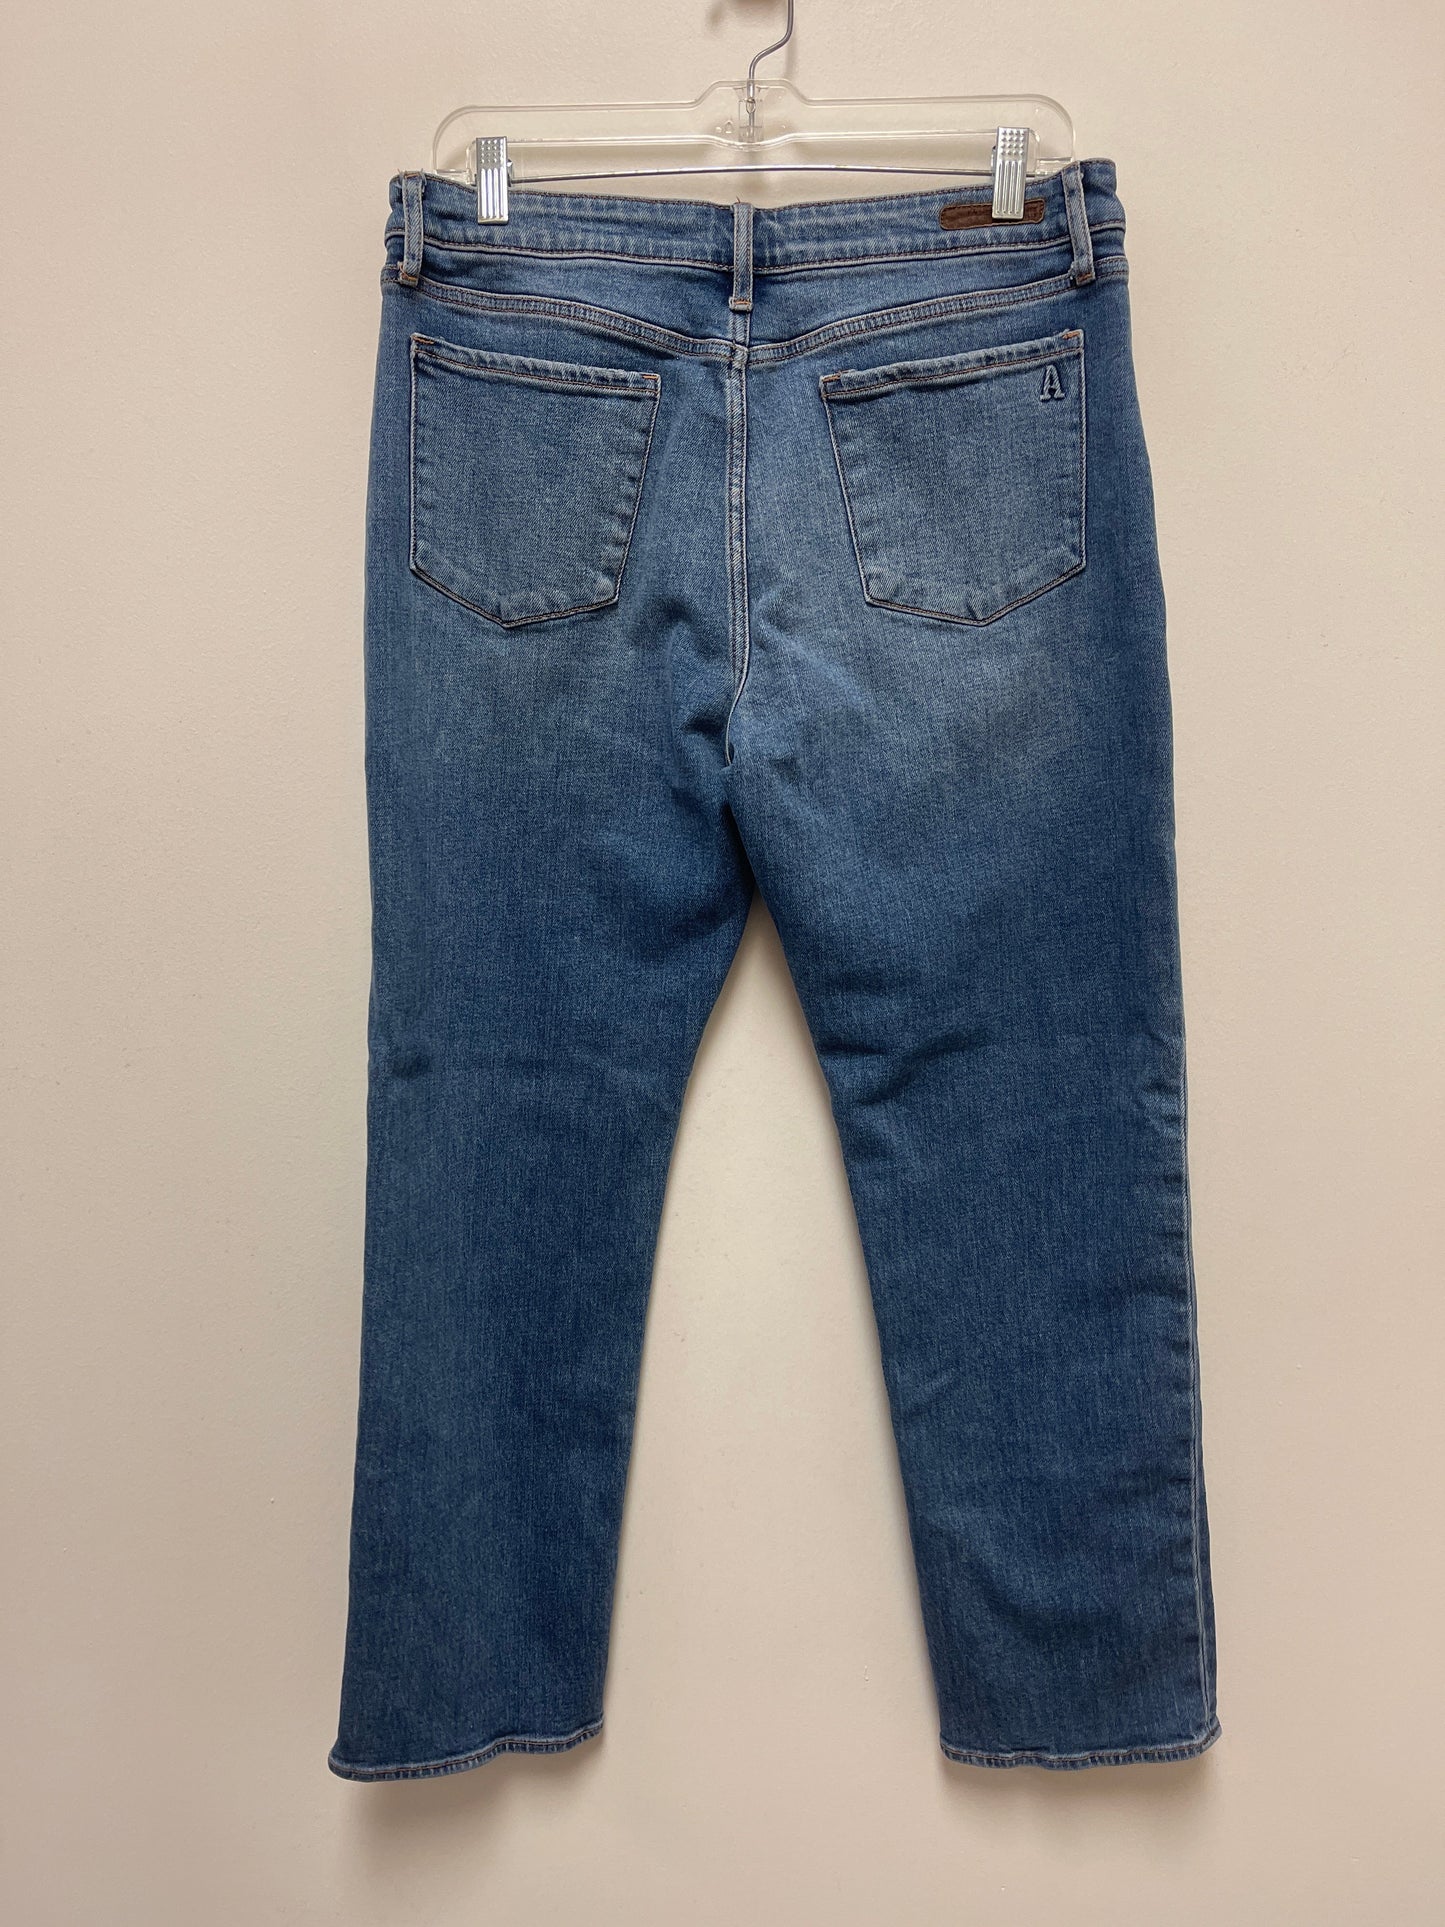 Jeans Straight By Articles Of Society  Size: 10